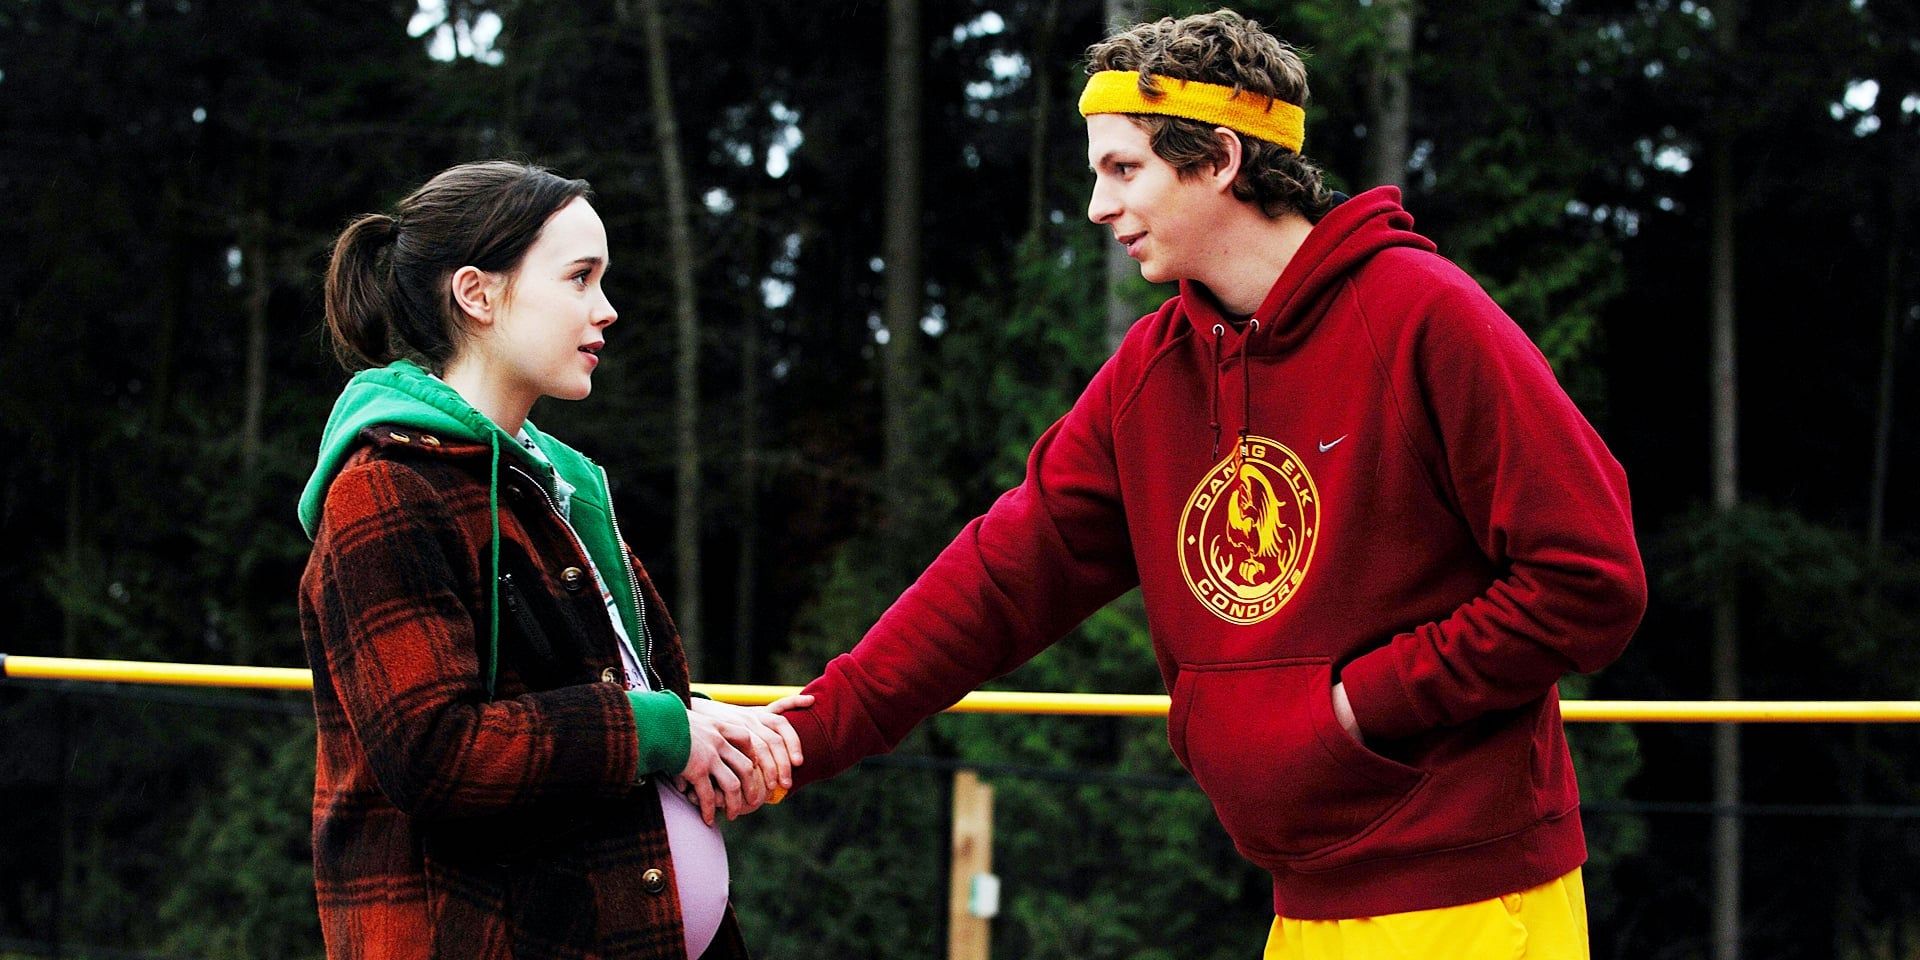 Paulie touching Juno's pregnant belly in Juno